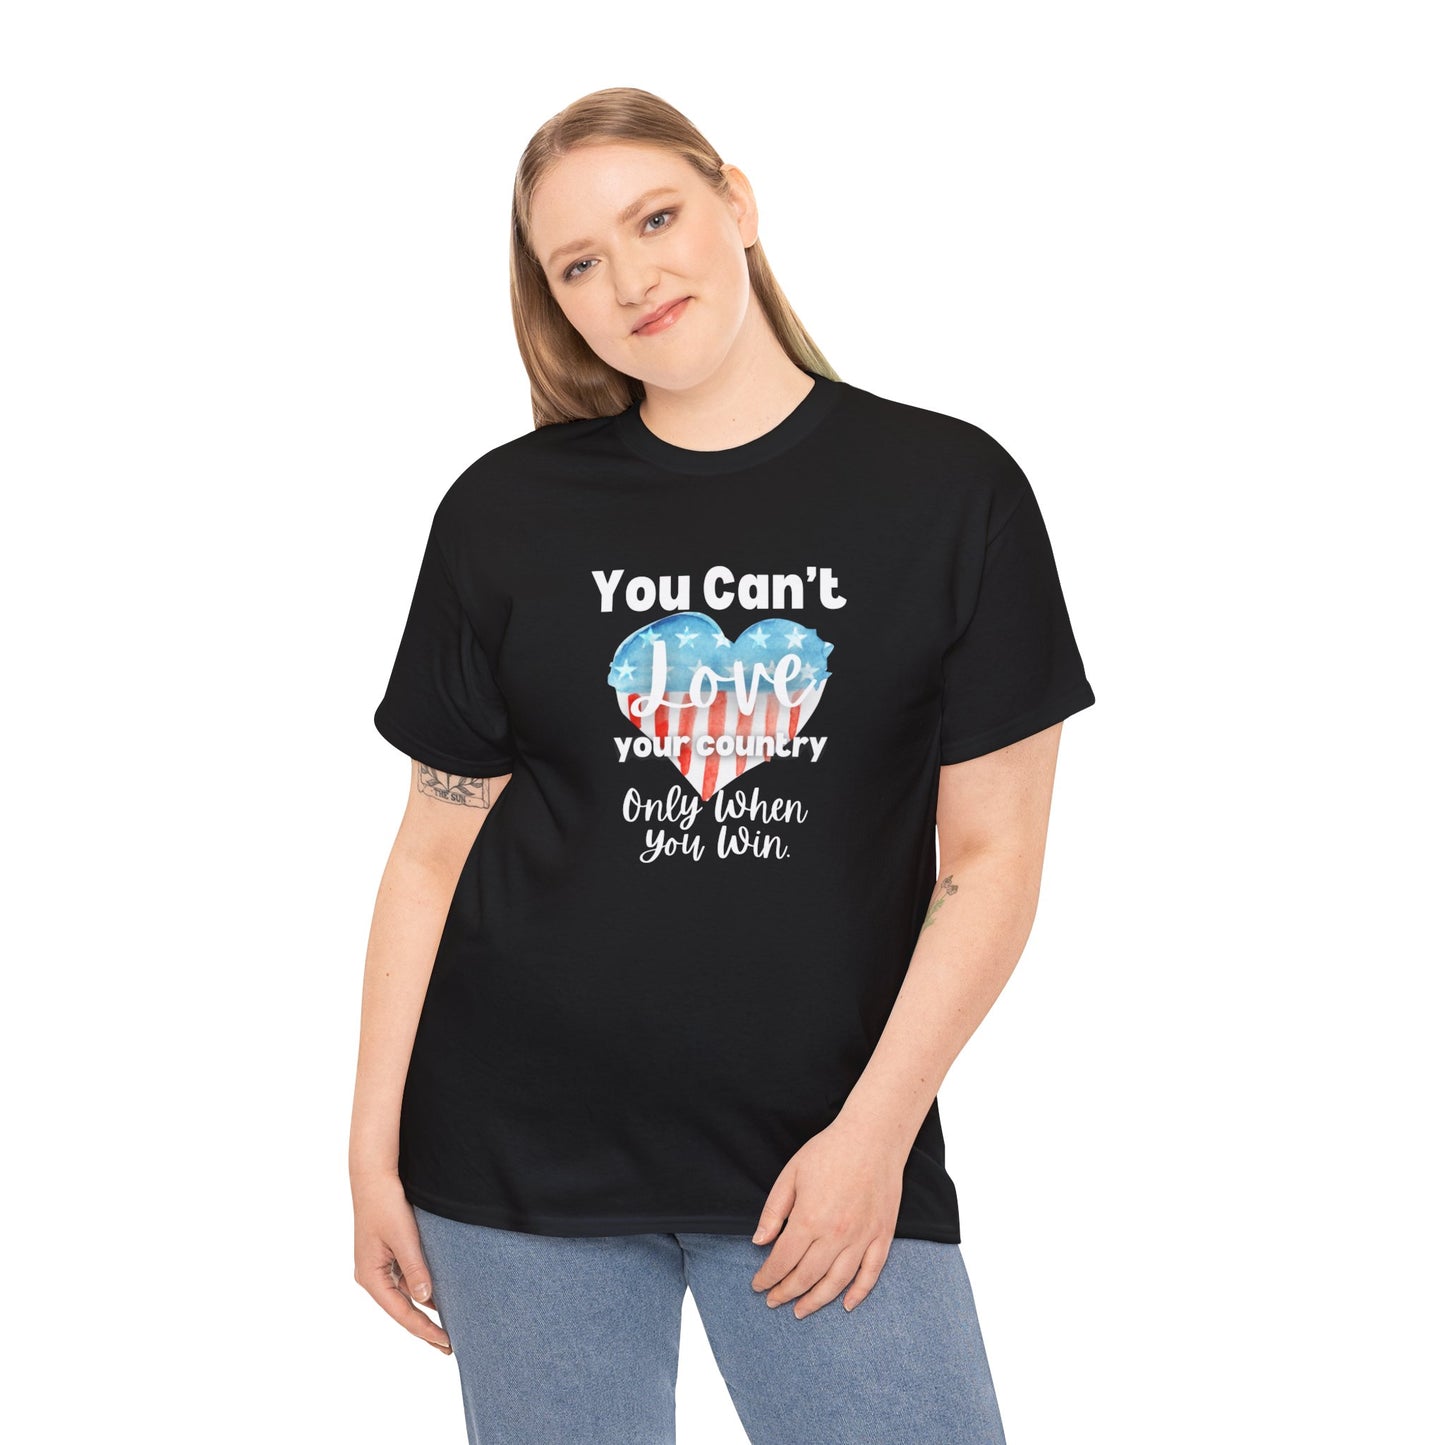 You can't Love Your Country, Only when you win, pro Biden Democrat, anti-trump, never Trumper, political t-shirt, pro democracy t-shirt